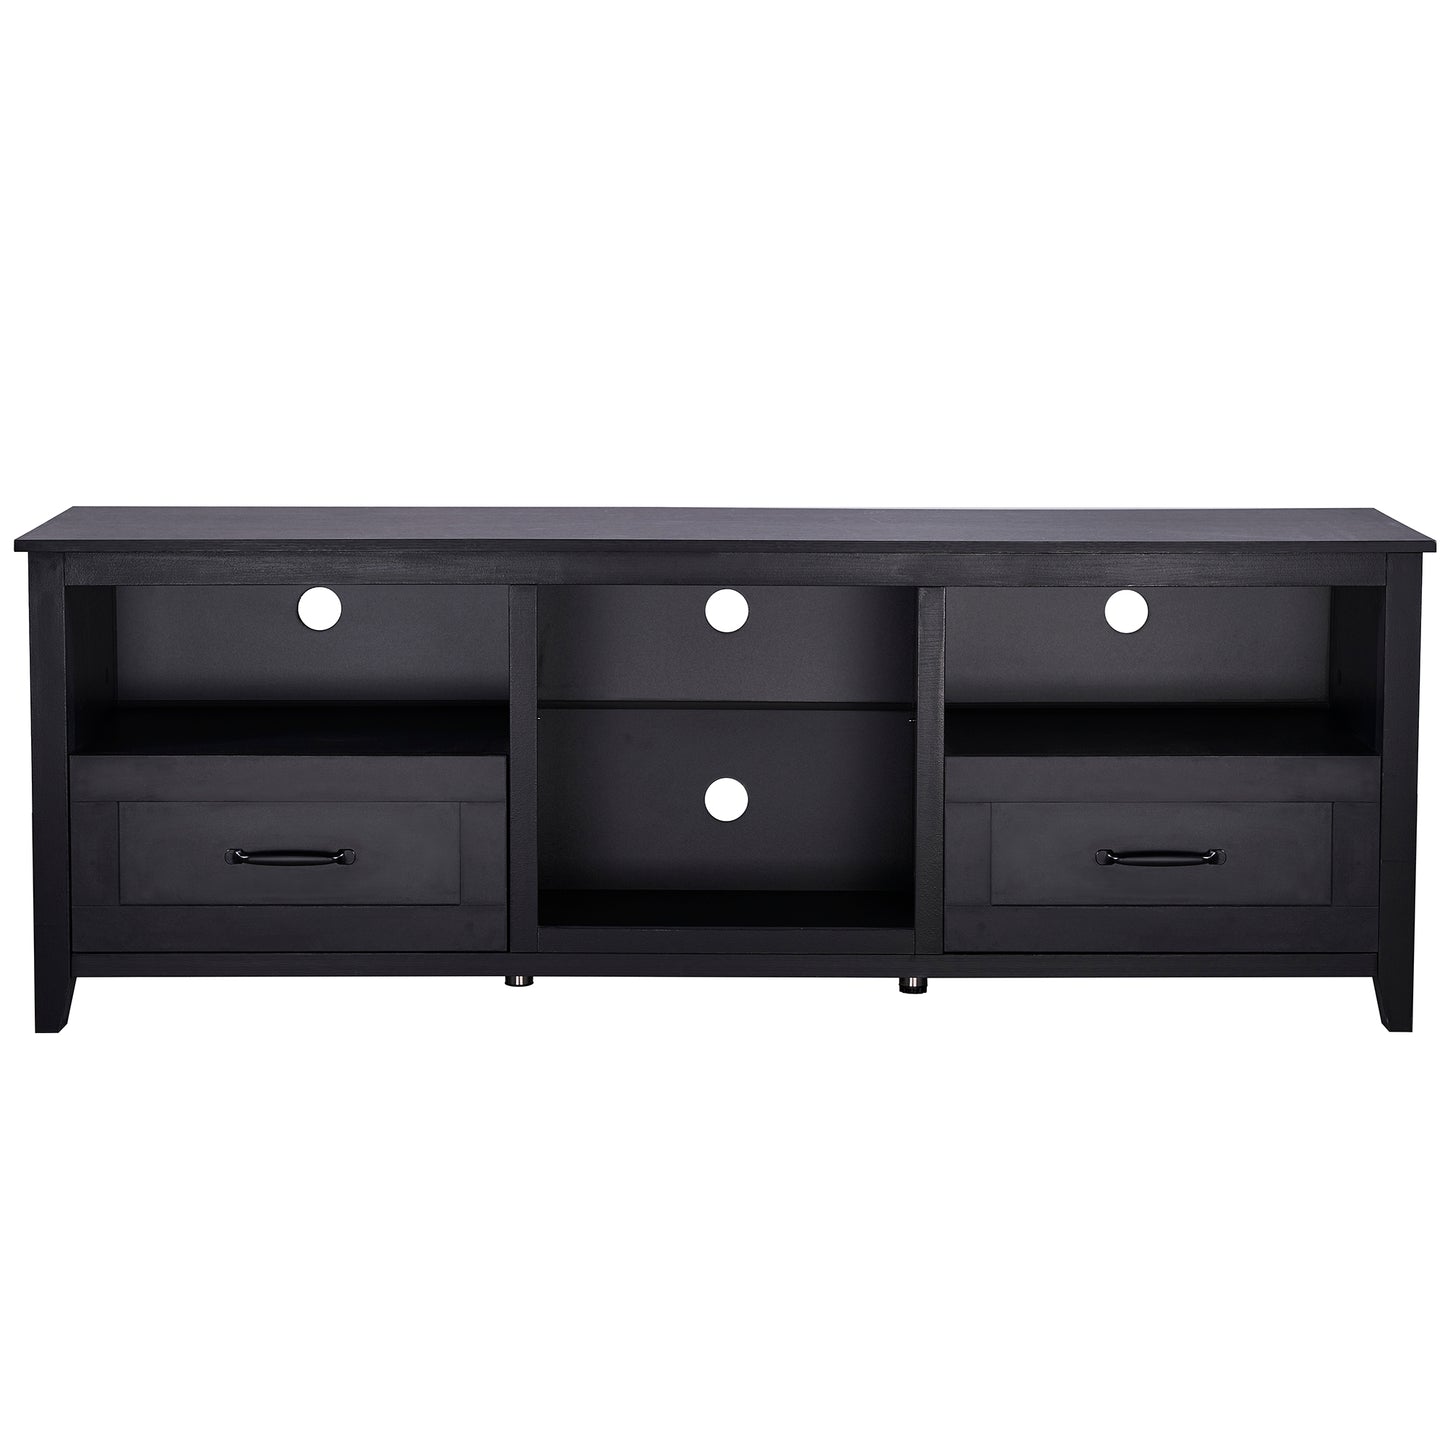 SYNGAR Farmhouse TV Stand for 70 inch TV, Wooden TV Cabinet Console Table with 2 Drawers and 4 Storage Compartments, Entertainment Center for Living Room, Traditional Black, 70"L x 15"W x 25"H